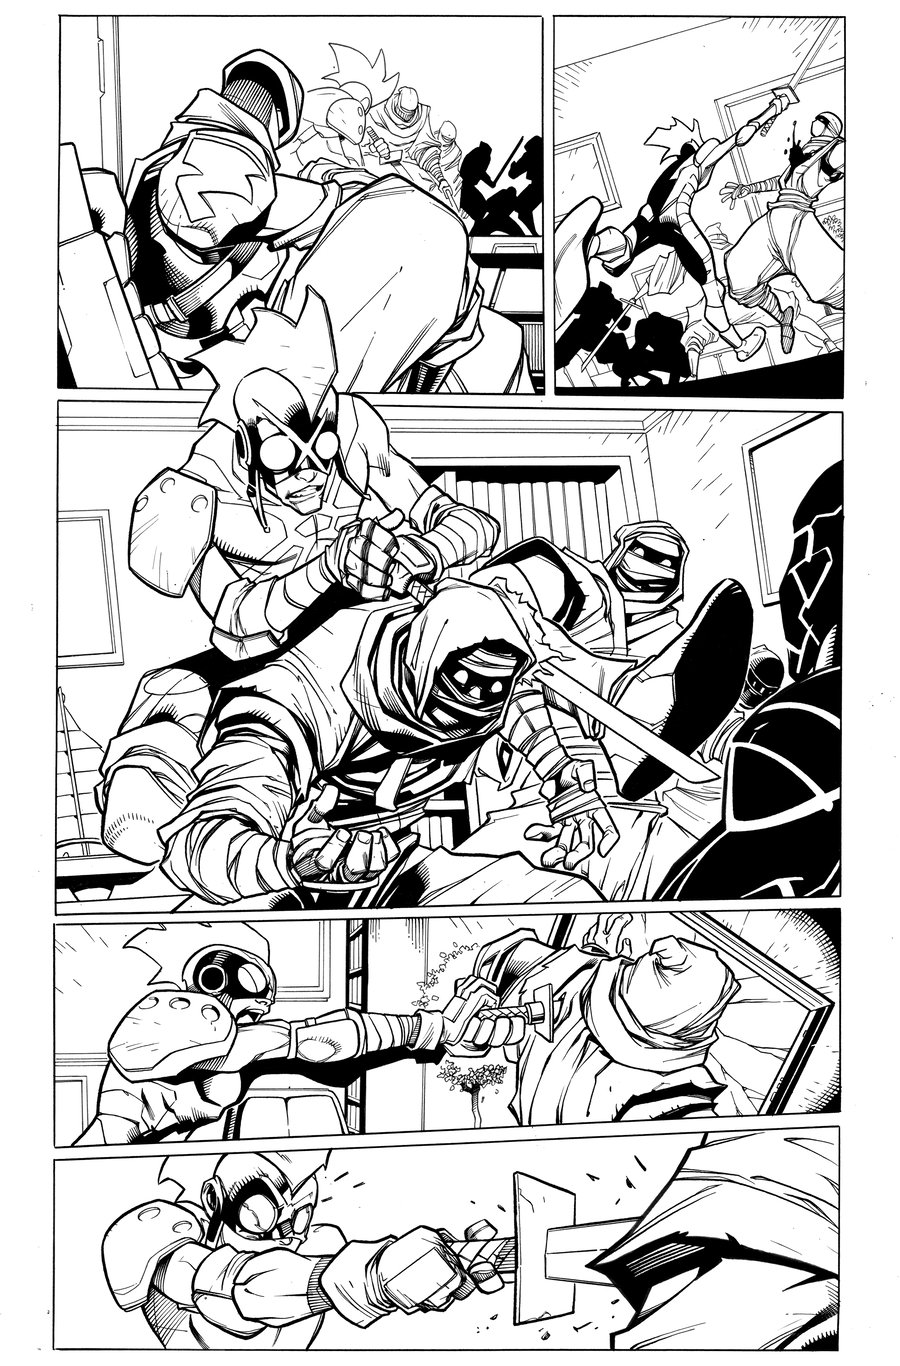 Image of Shadow War Zone #1: Ghostmaker and Clown Hunter PG 05